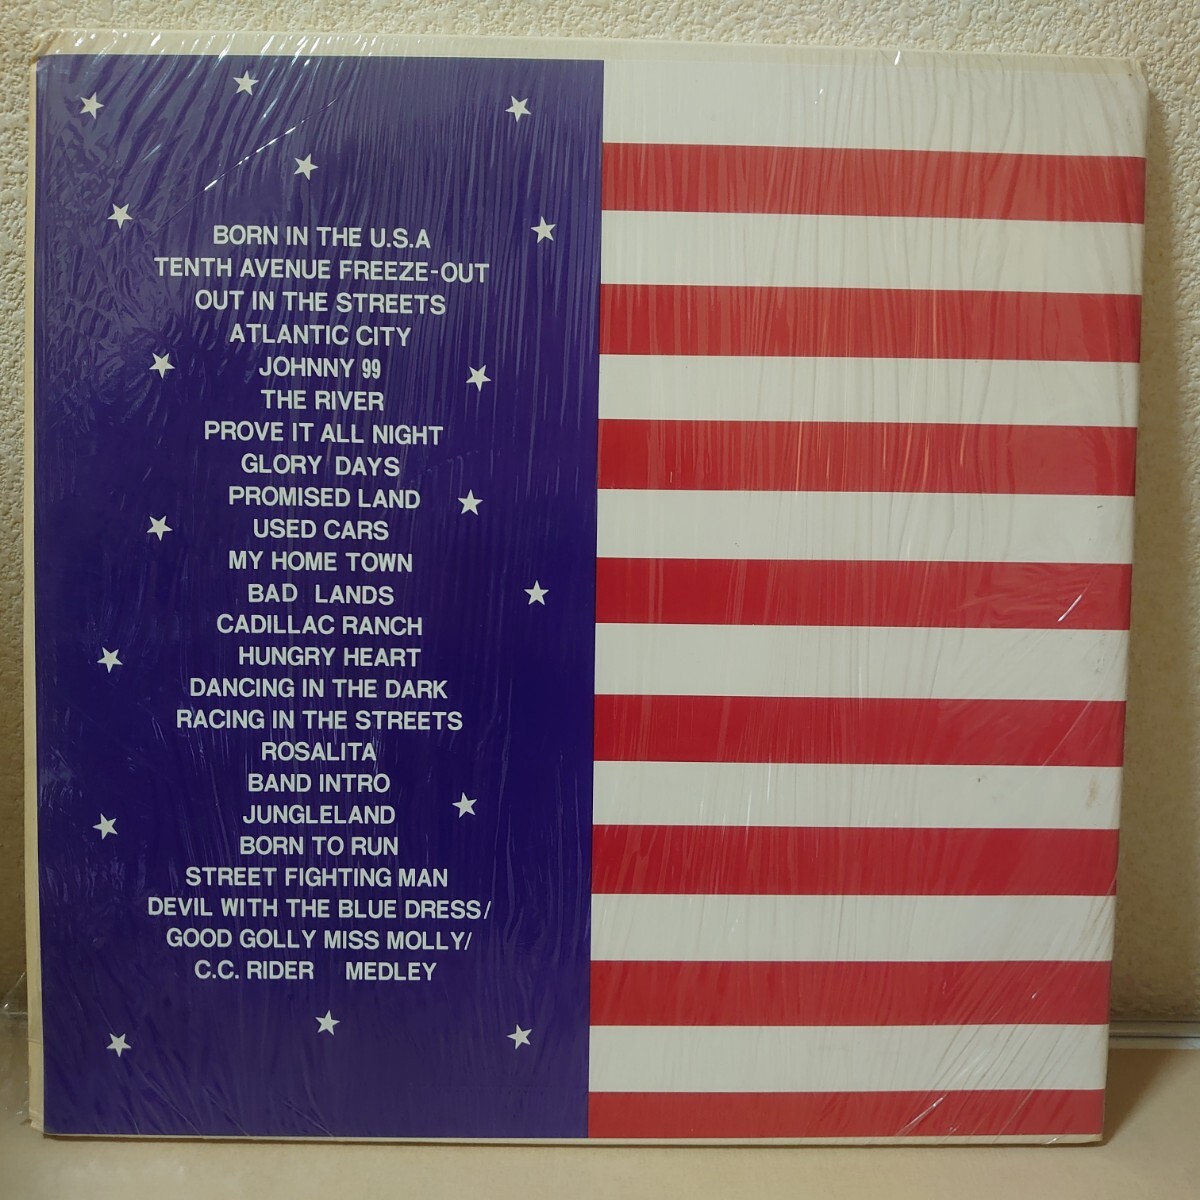 LP☆Bruce Springsteen/BORN IN THE AMERICA［Red, Blue, White wax/Special Limited/カラーレコード3枚組/コレクターズ/LIVE IN USA1984］_画像3